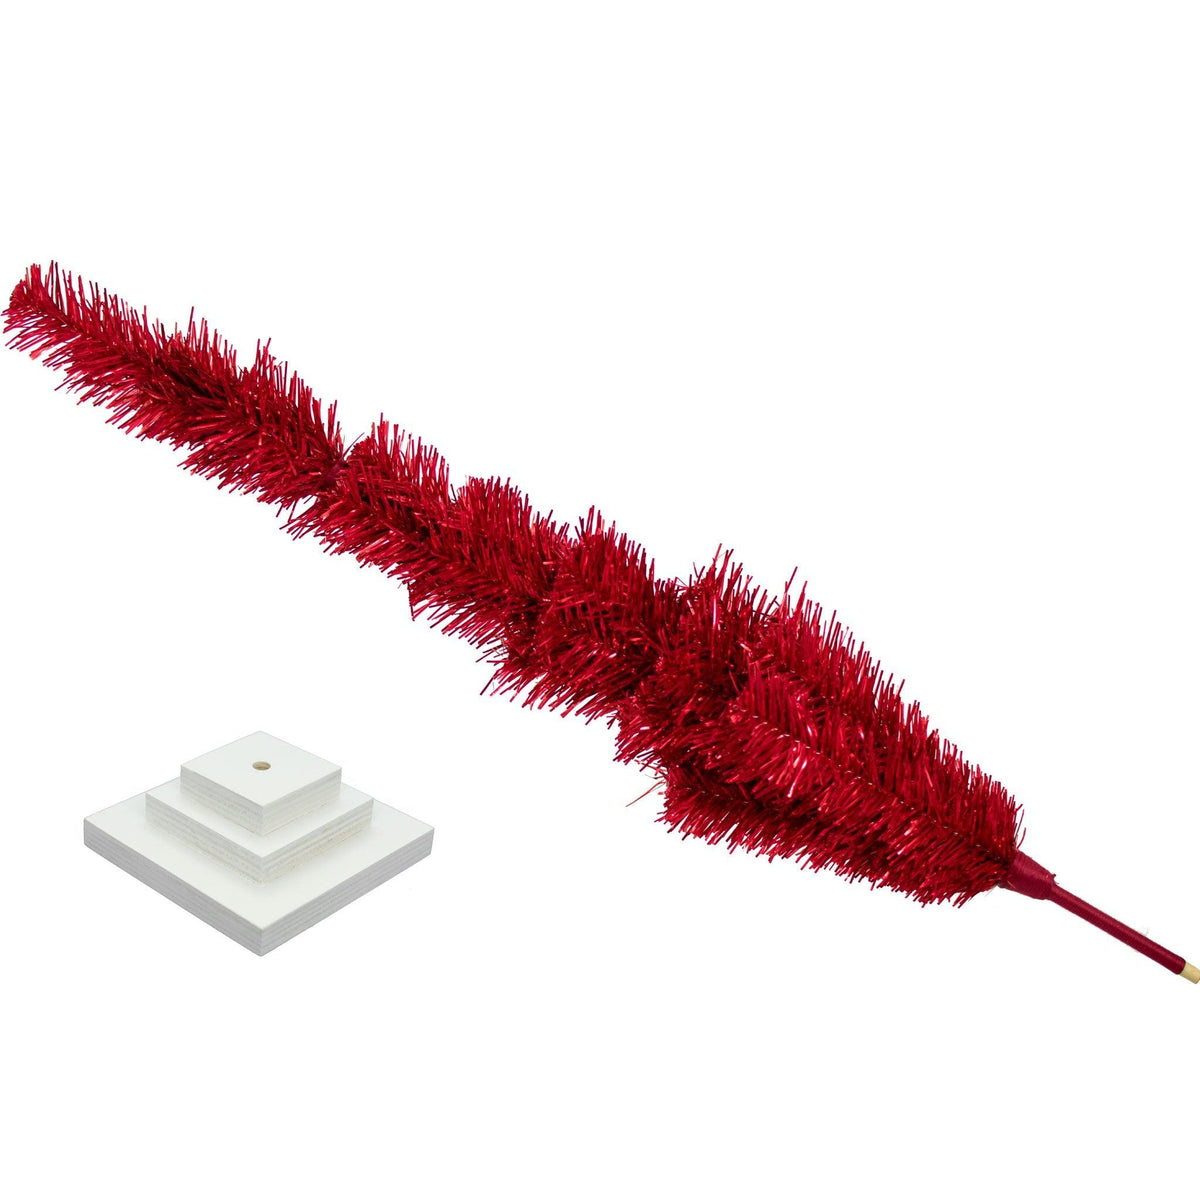 All Lee Display's tinsel trees have folding branches for easy assembly and storage